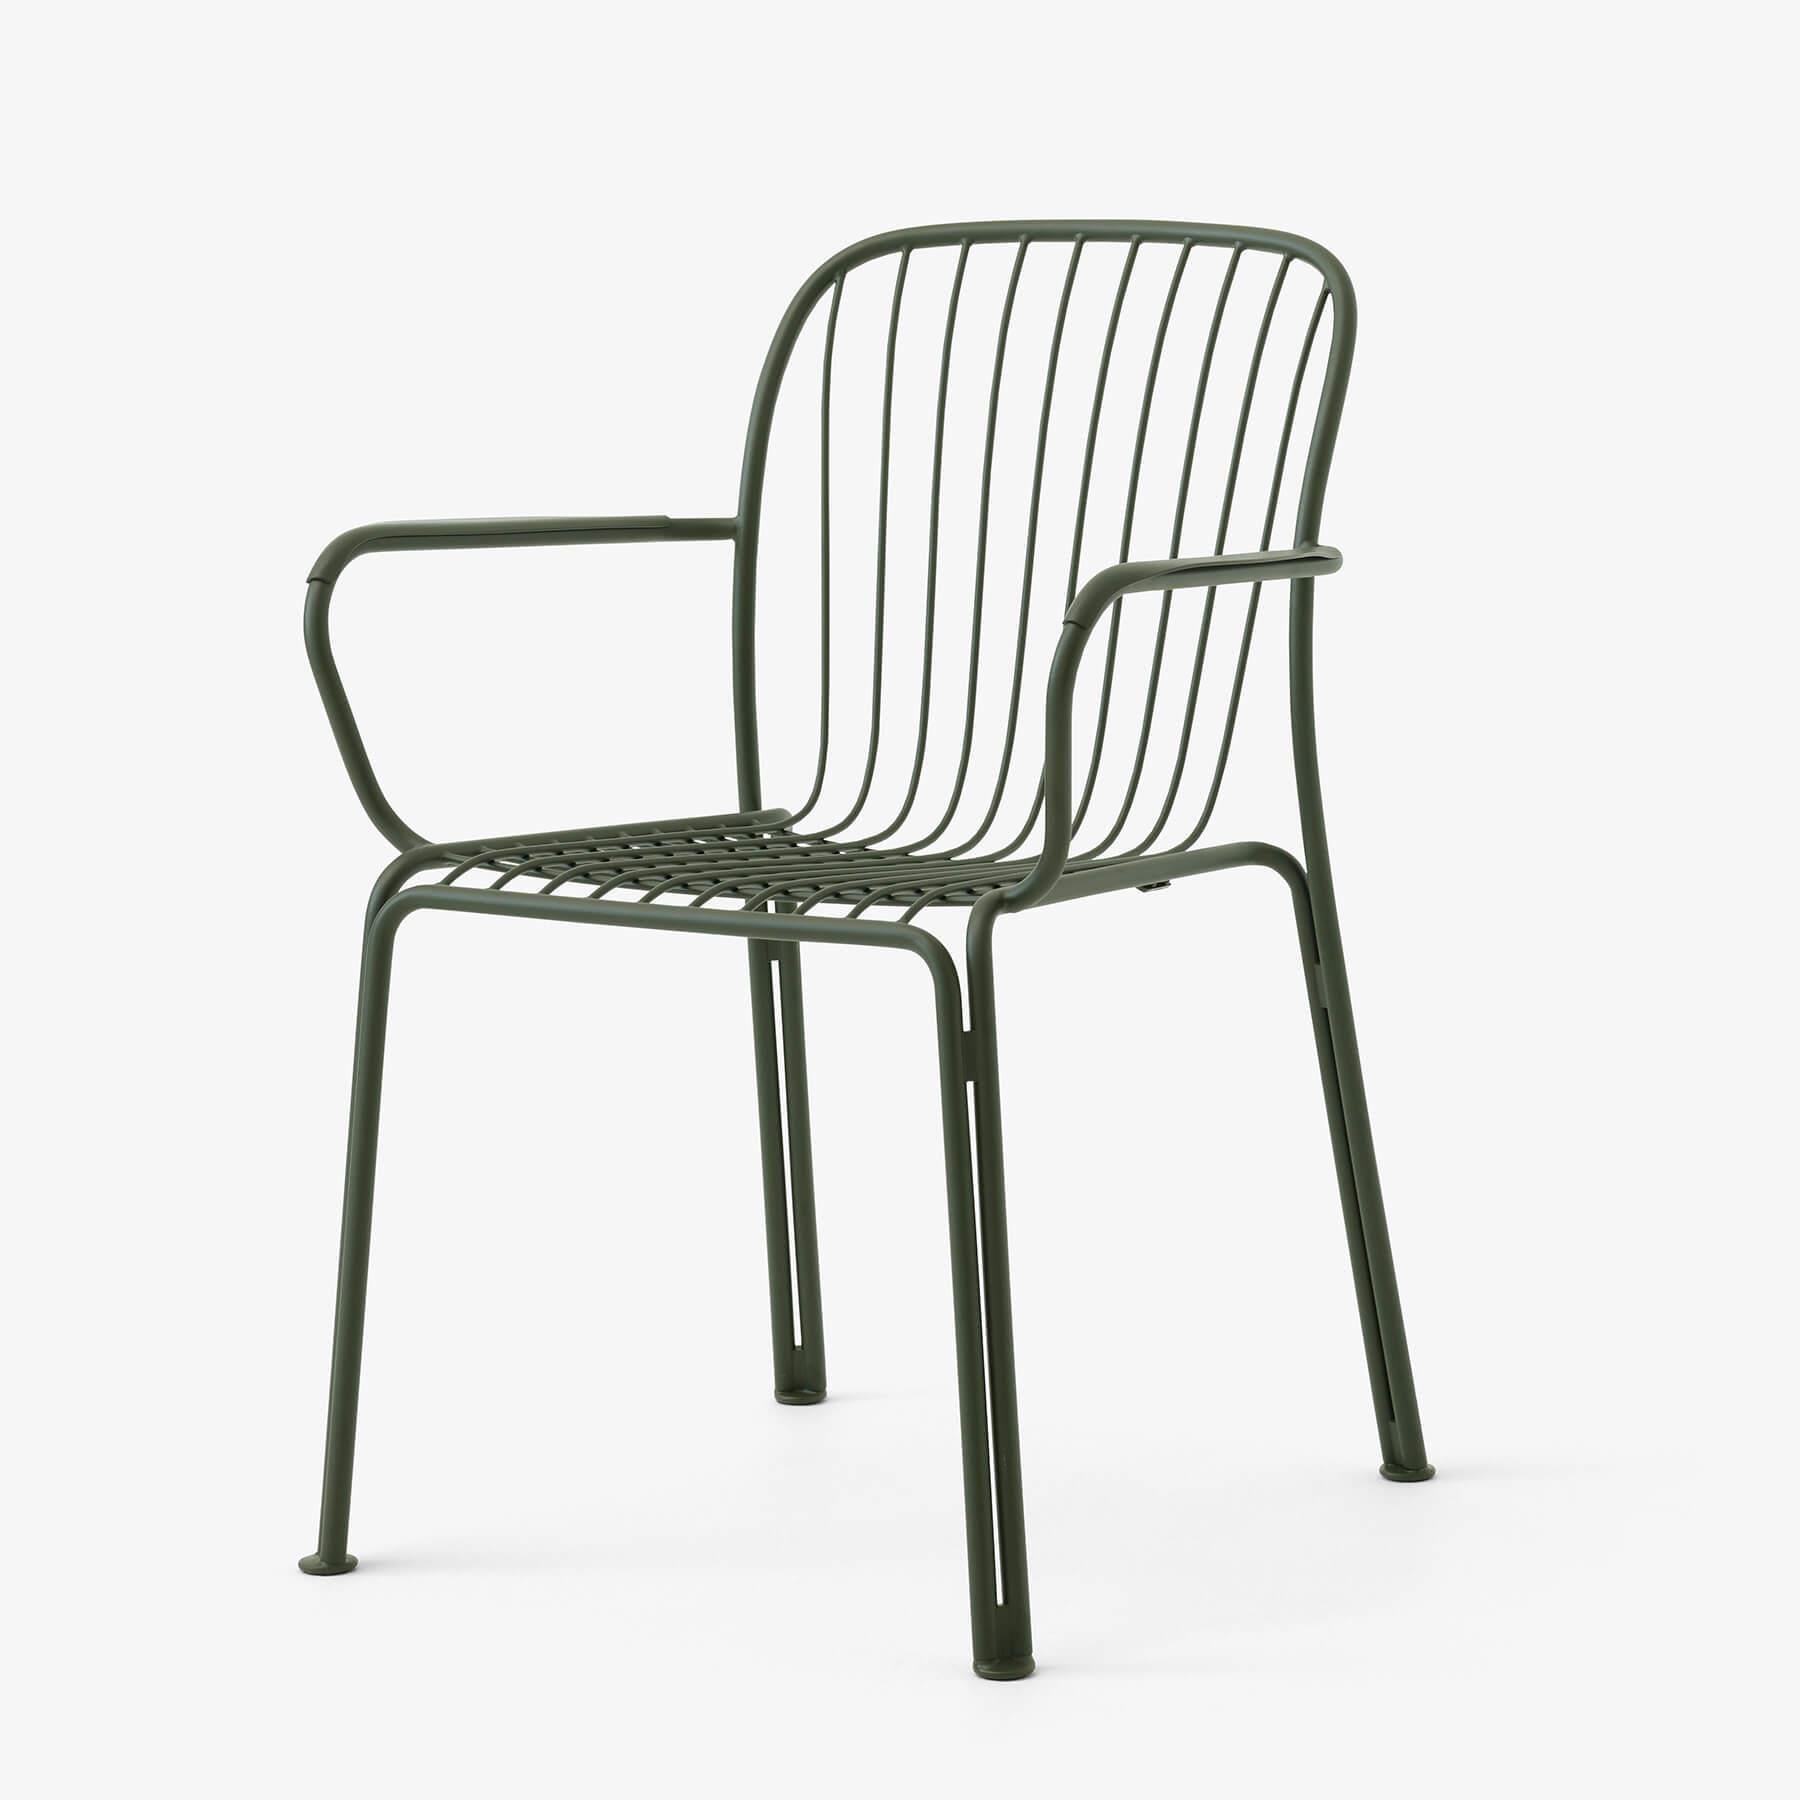 Tradition Thorvald Sc95 Outdoor Chair Bronze Green